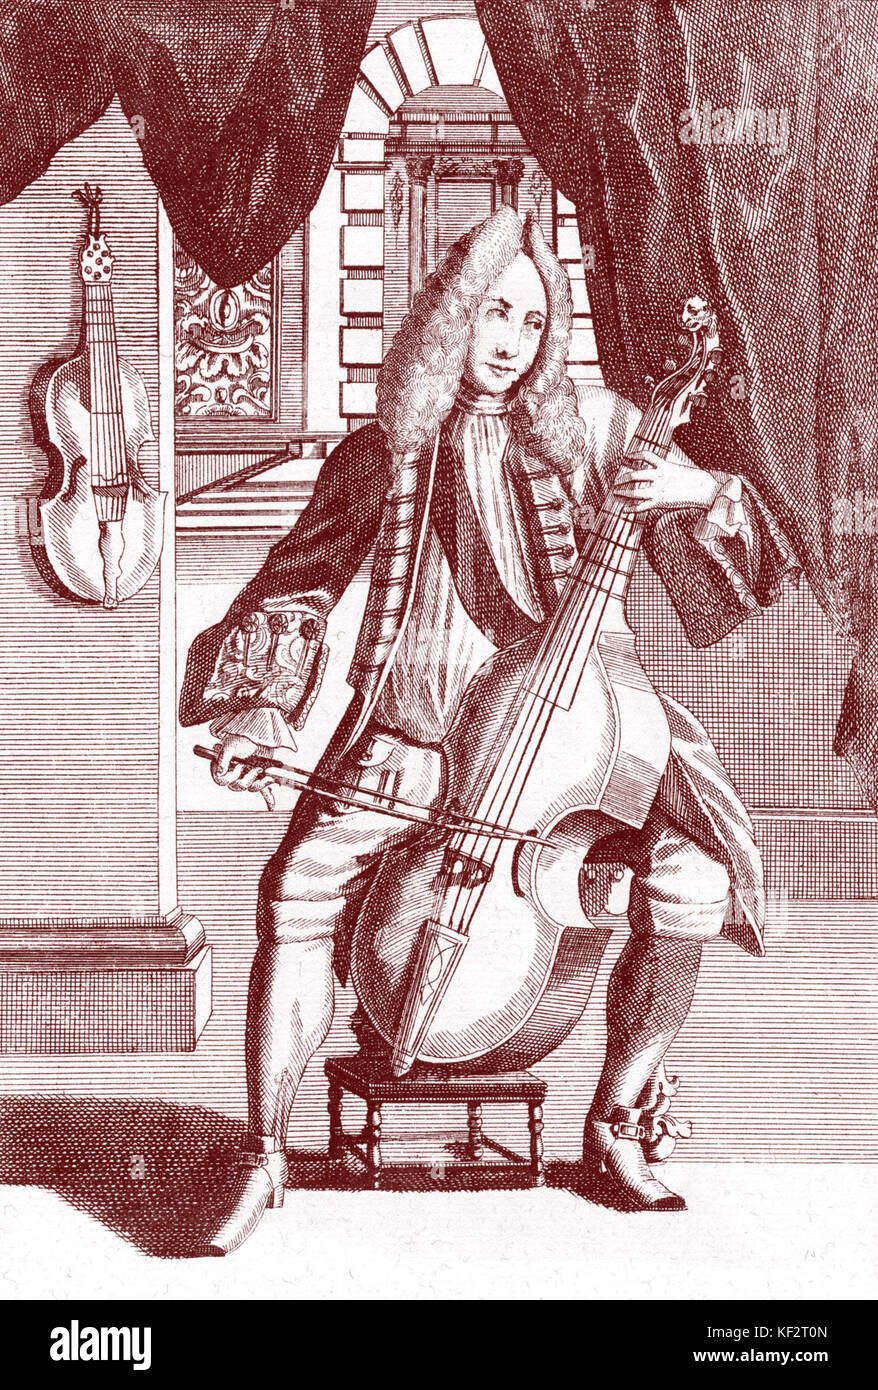 Man playing viola da gamba. Engraving by J.C. Weigel (1661-1726) from 'Musikalisches Theatrum'. Stock Photo